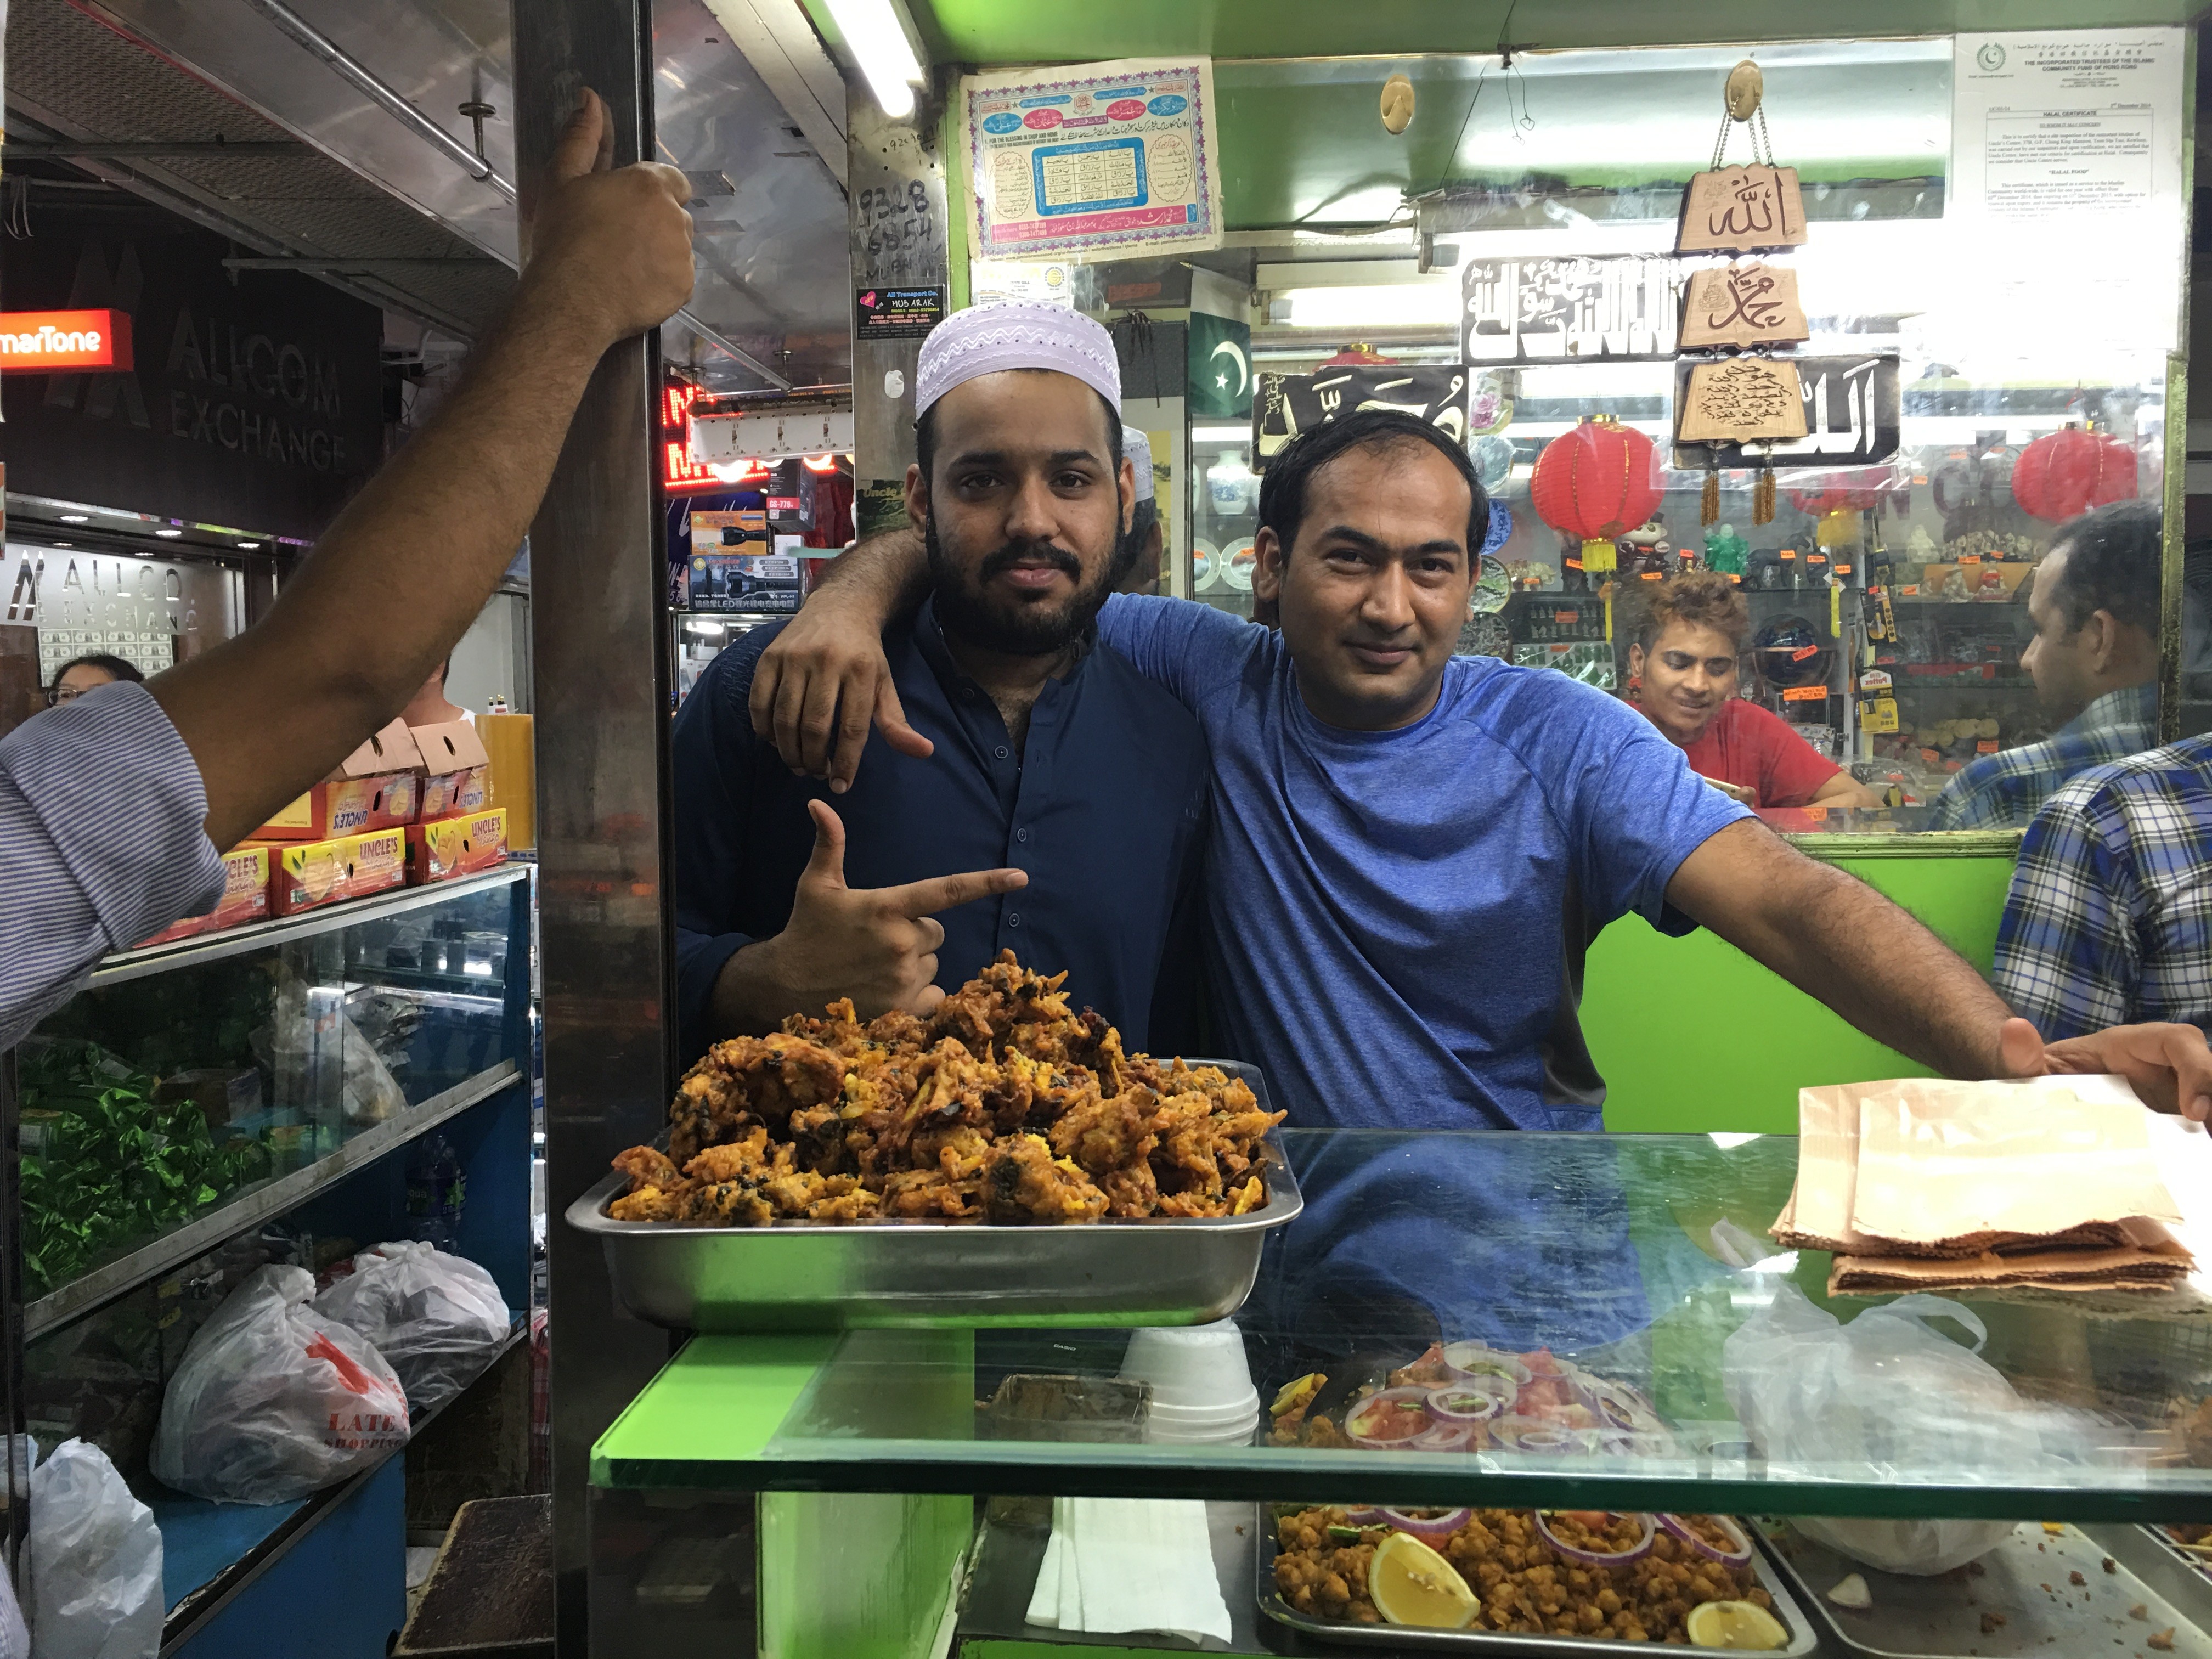 Star of a Wong Kar-wai movie and an icon of urban Hong Kong, Chungking Mansions is too often portrayed as unsafe and a den of vice. Don’t believe a word of it – or you’ll be missing out on some of the city’s best Indian food